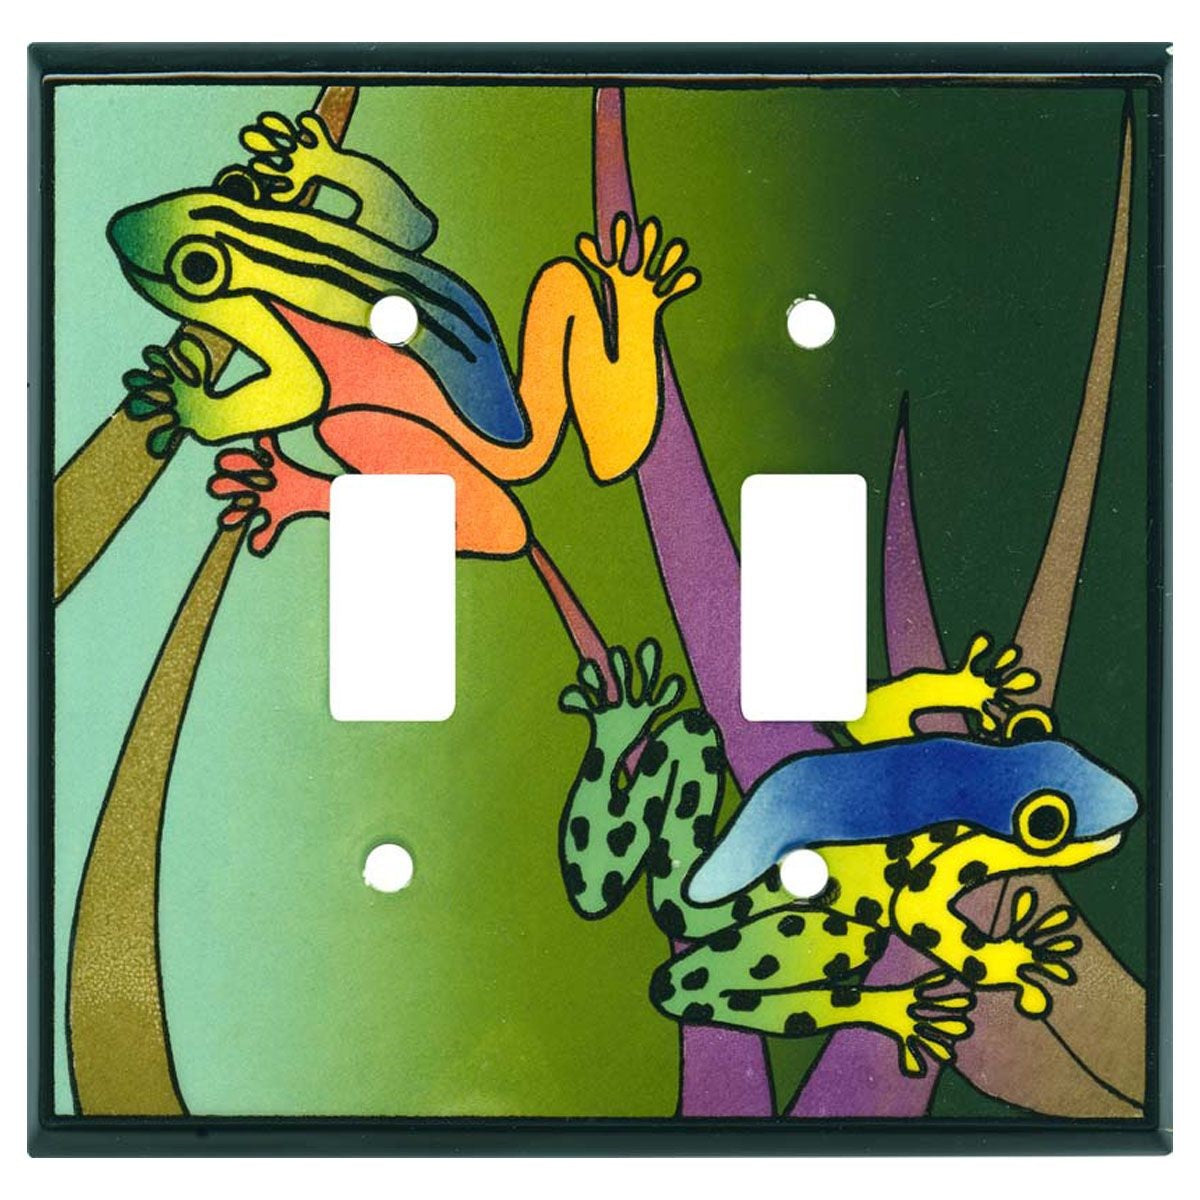 Rain Forest Switch Plate